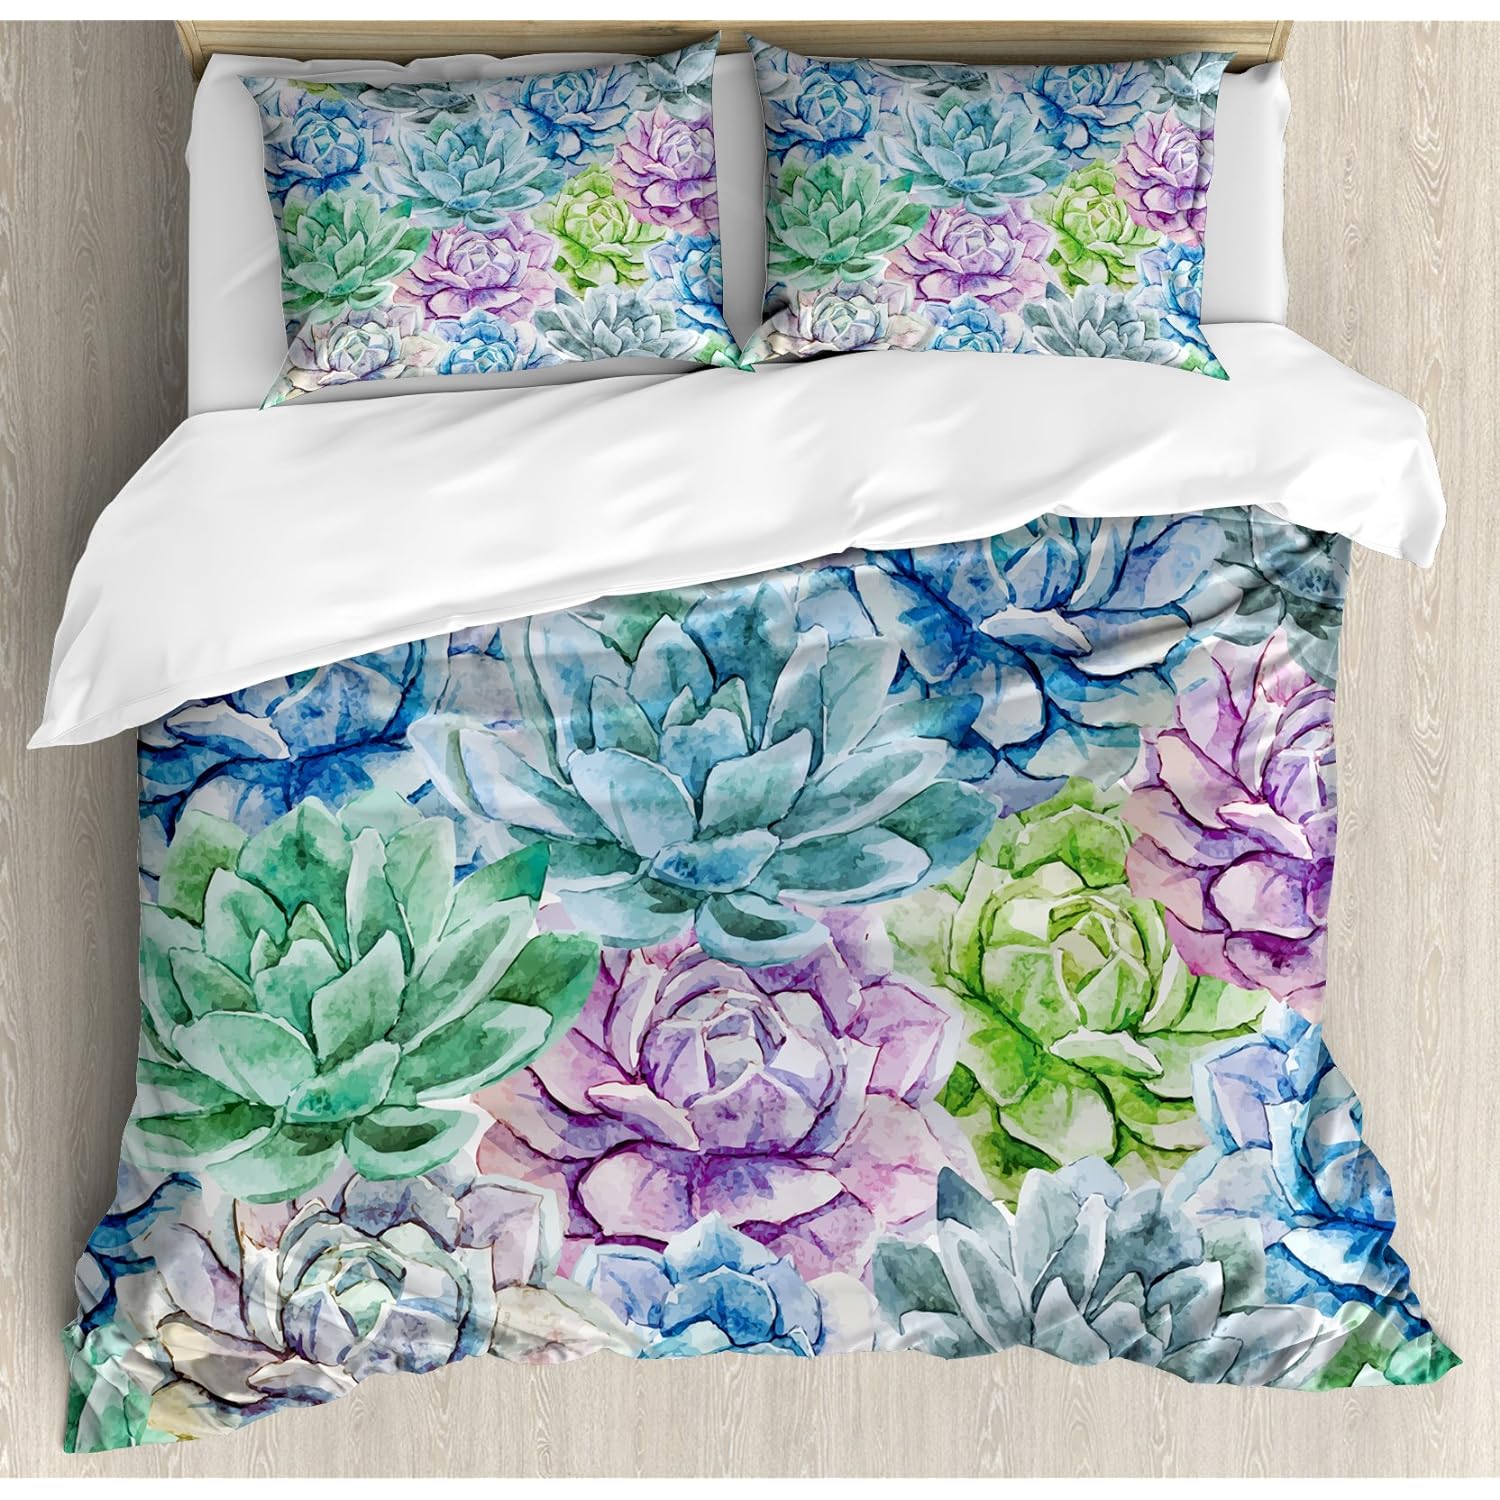 TKM Home Succulent Duvet Cover Set, Flowers In Watercolor Painting Style Colorful Spring Blossoms Gardening Theme, Decorative?